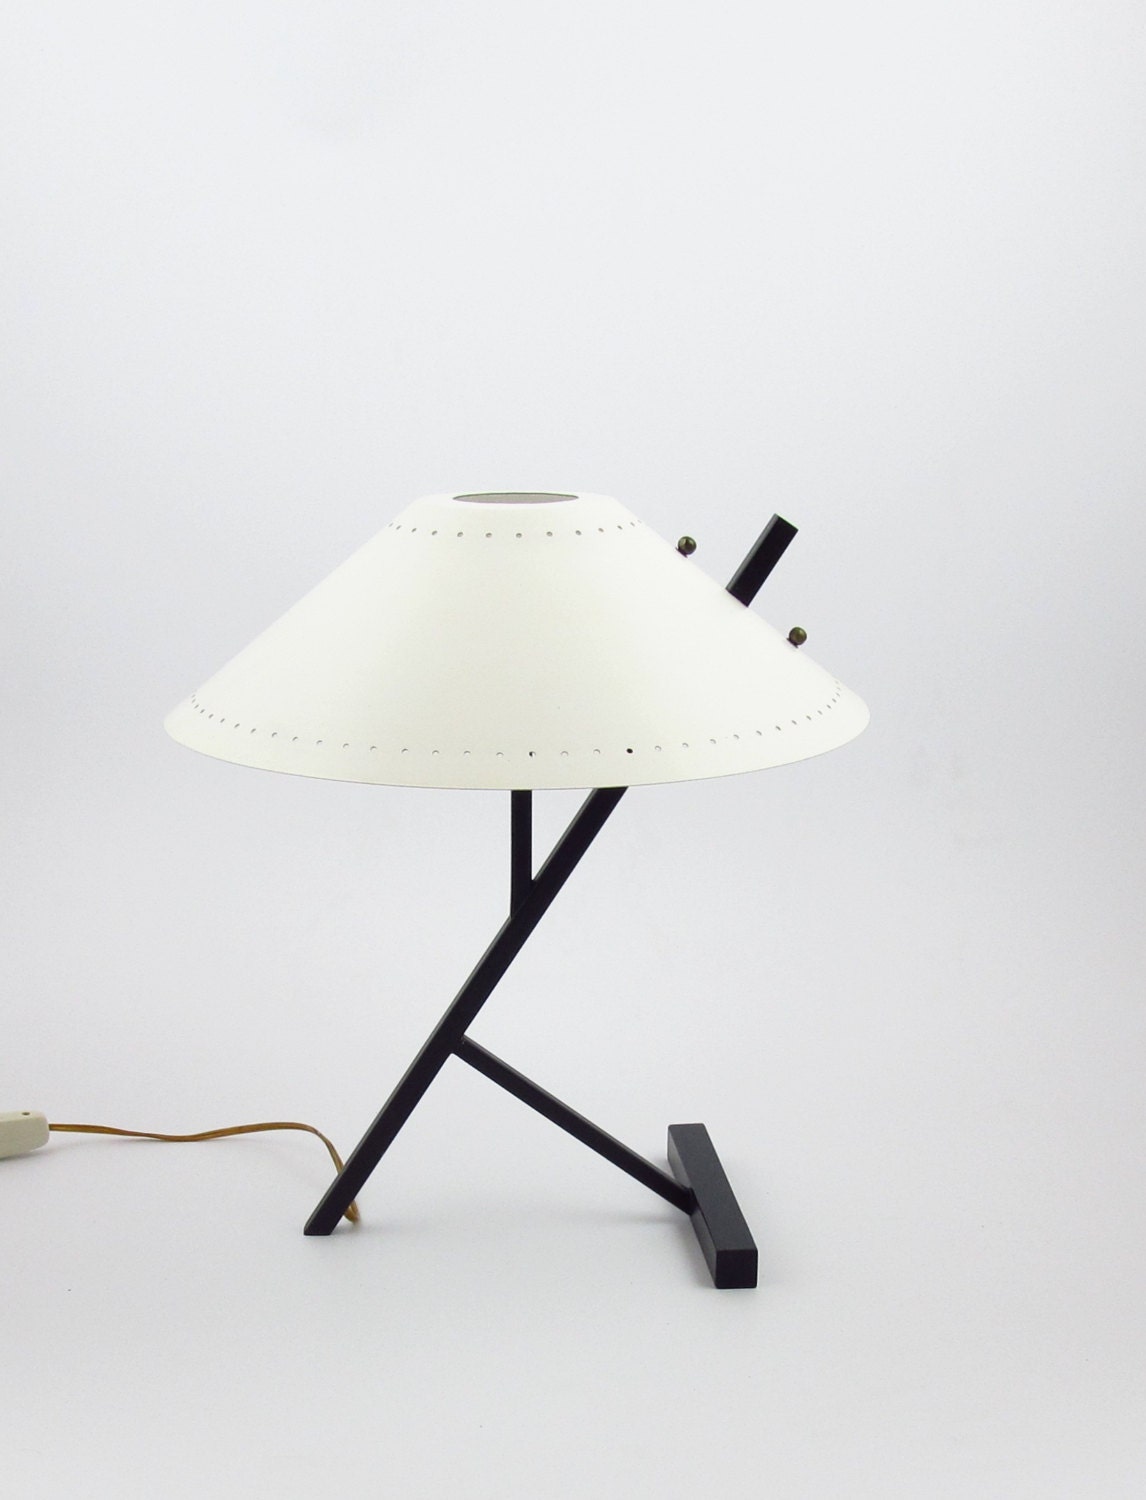 Beautiful tablelamp from the 1950s, white metal and aluminum desk lamp